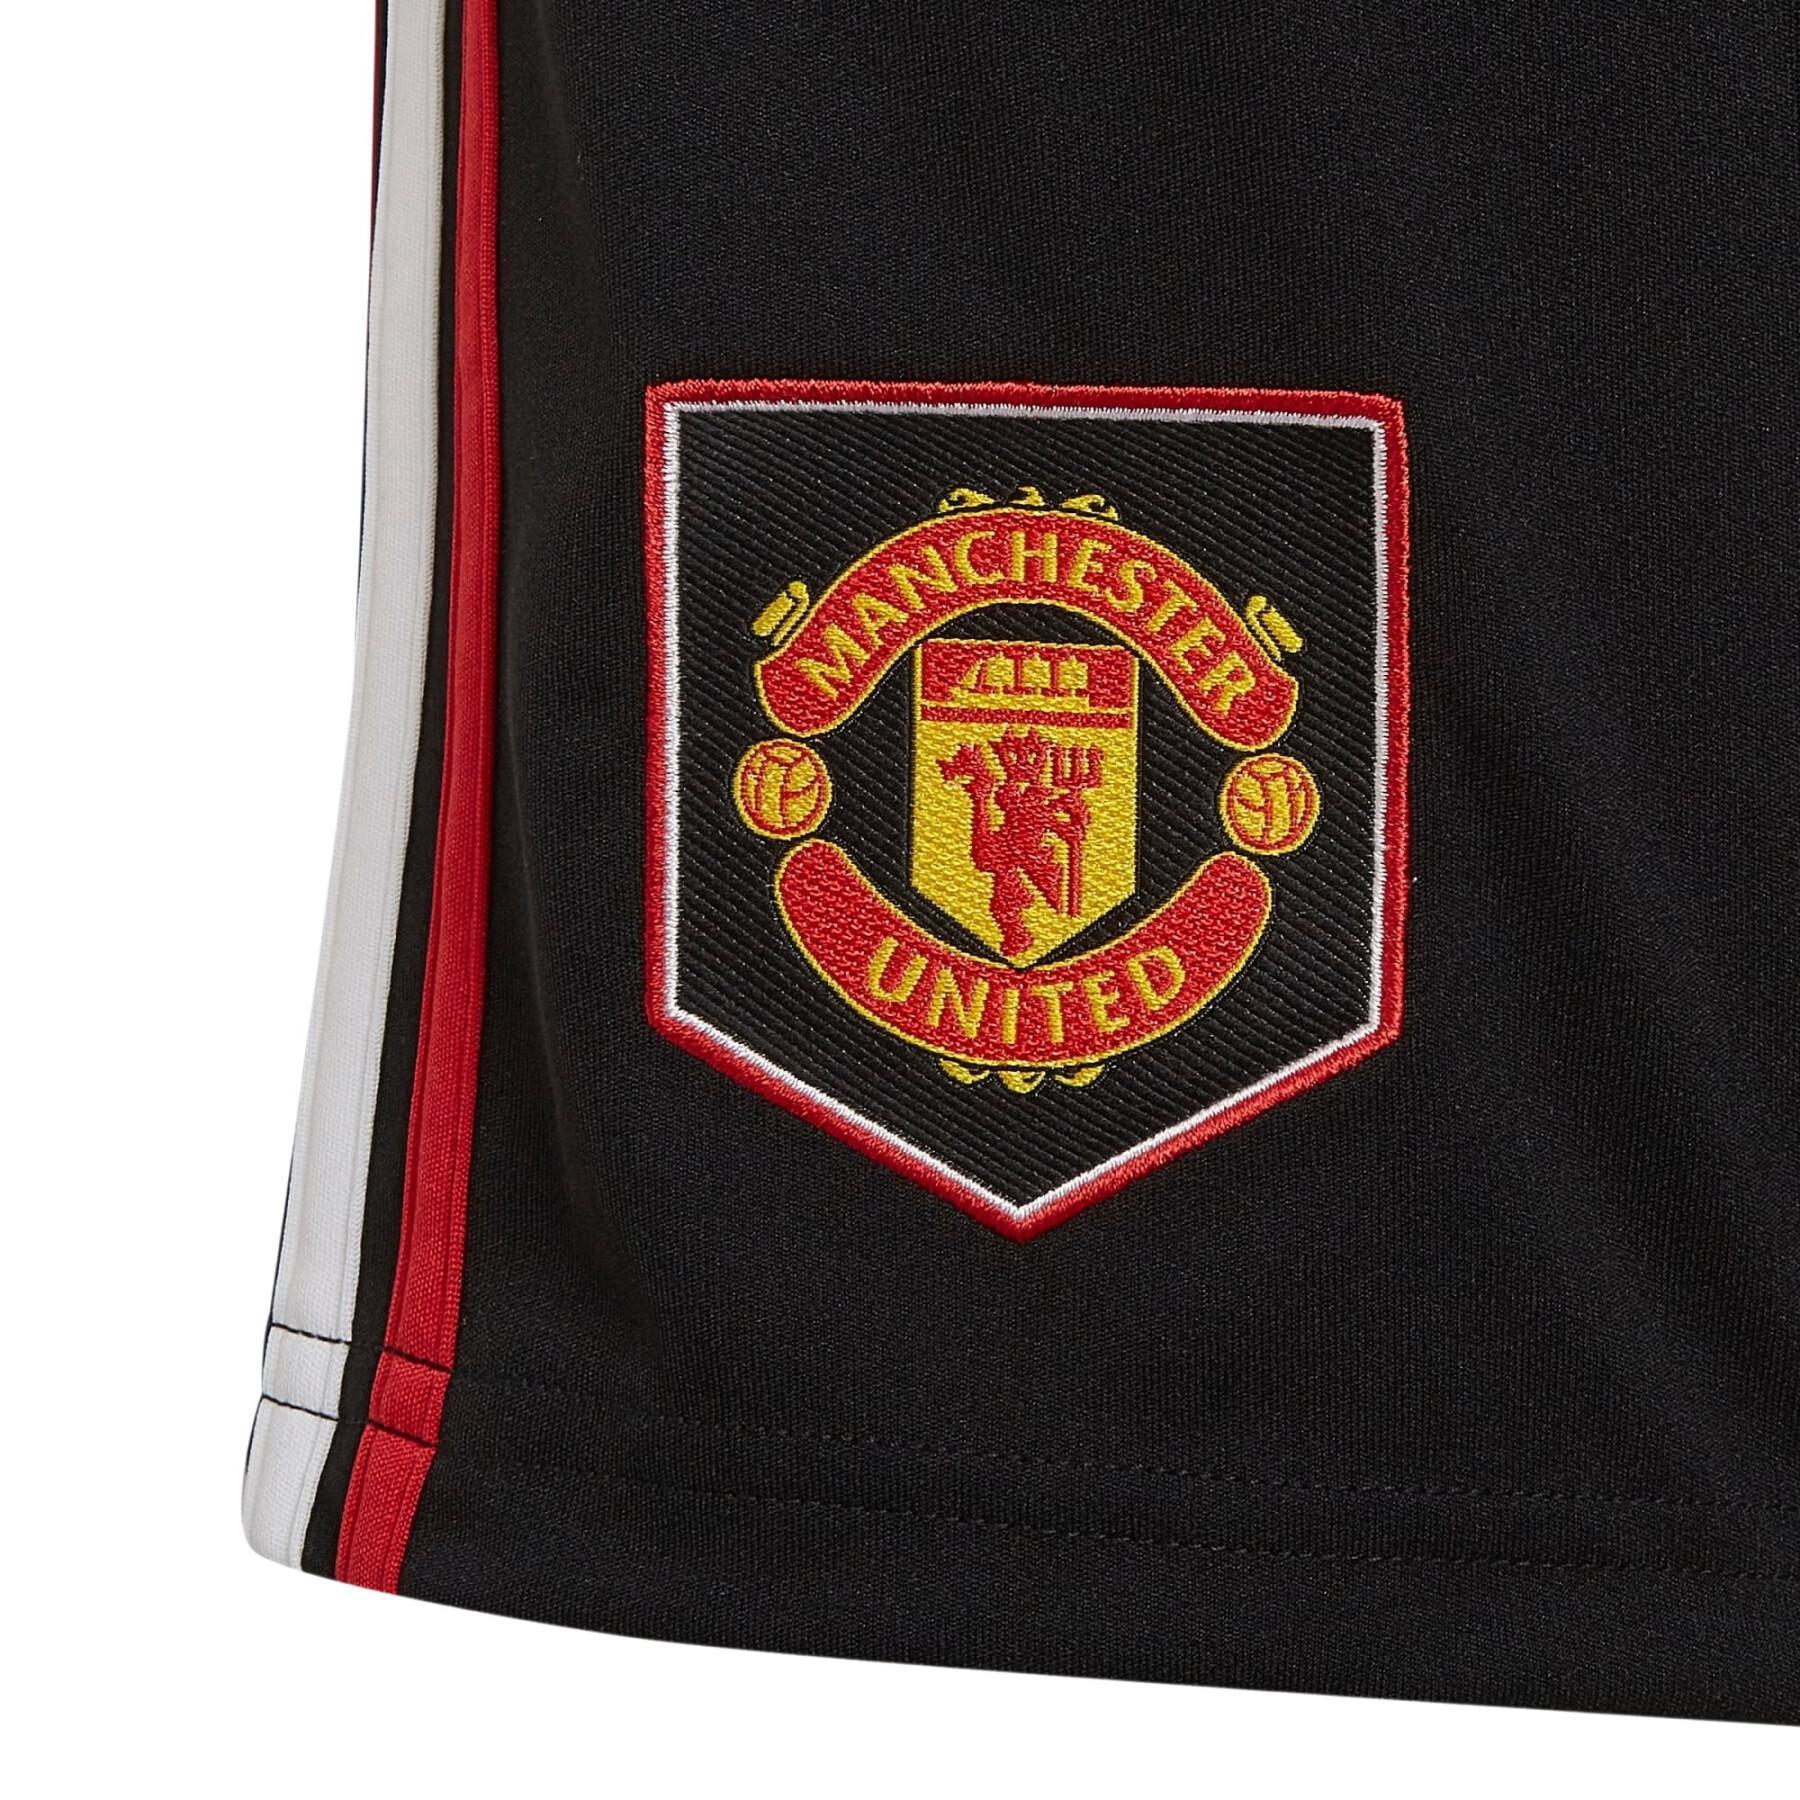 Outdoor-Shorts Kind Manchester United 2022/23